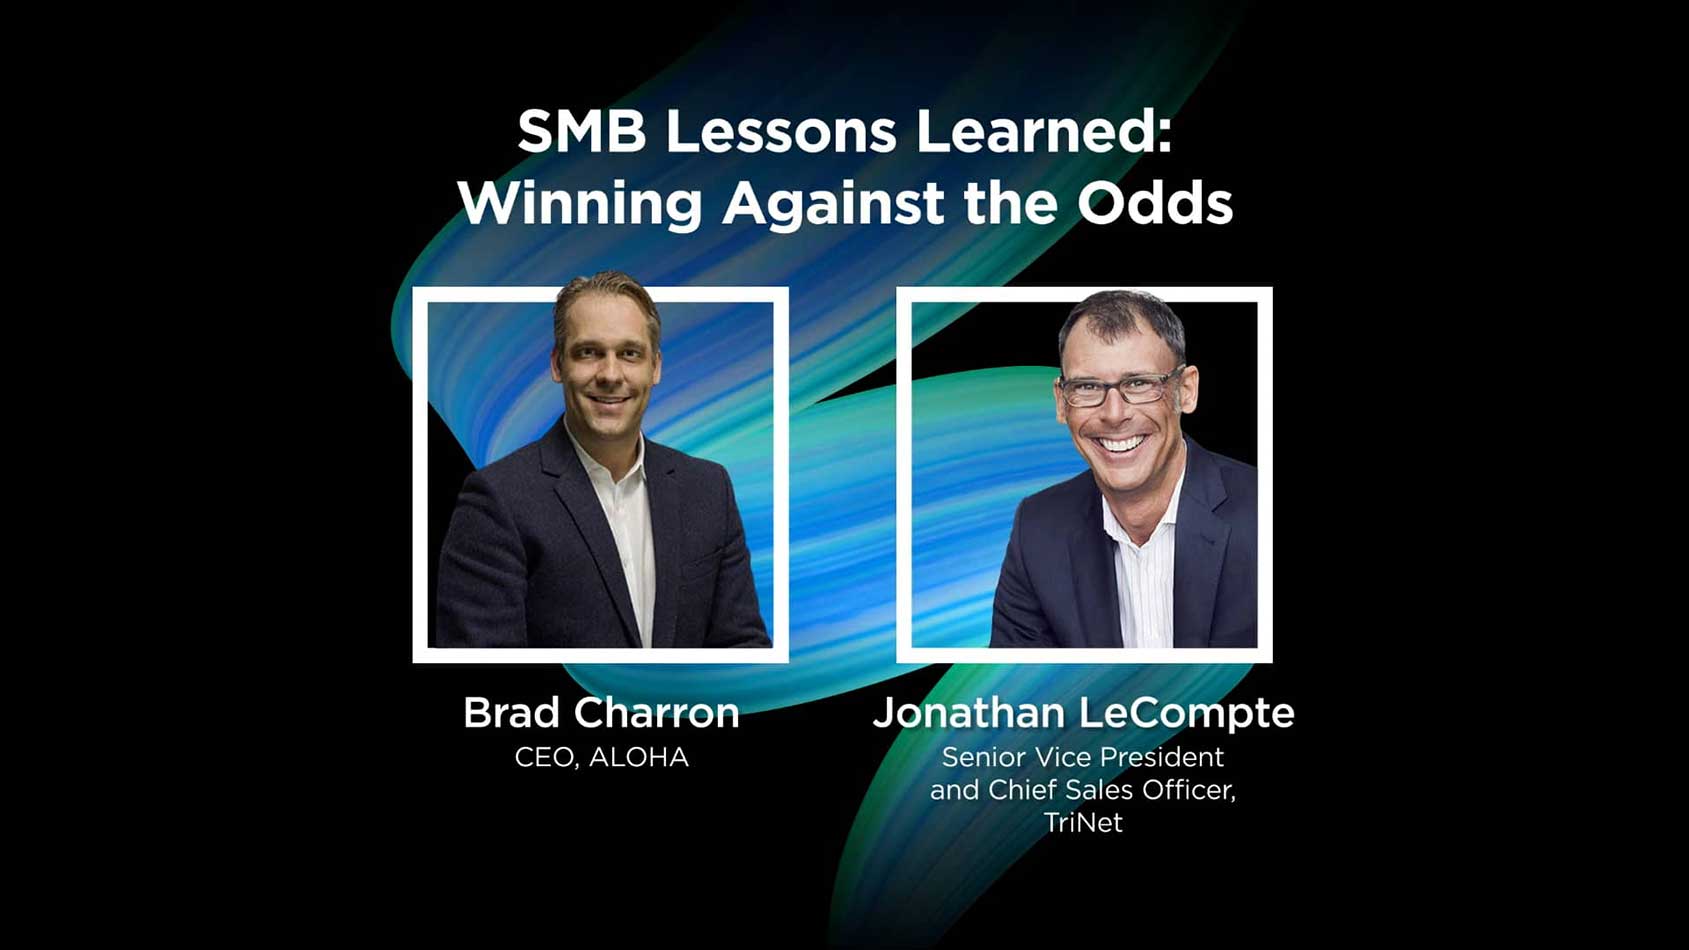 SMB Lessons Learned: Winning Against the Odds